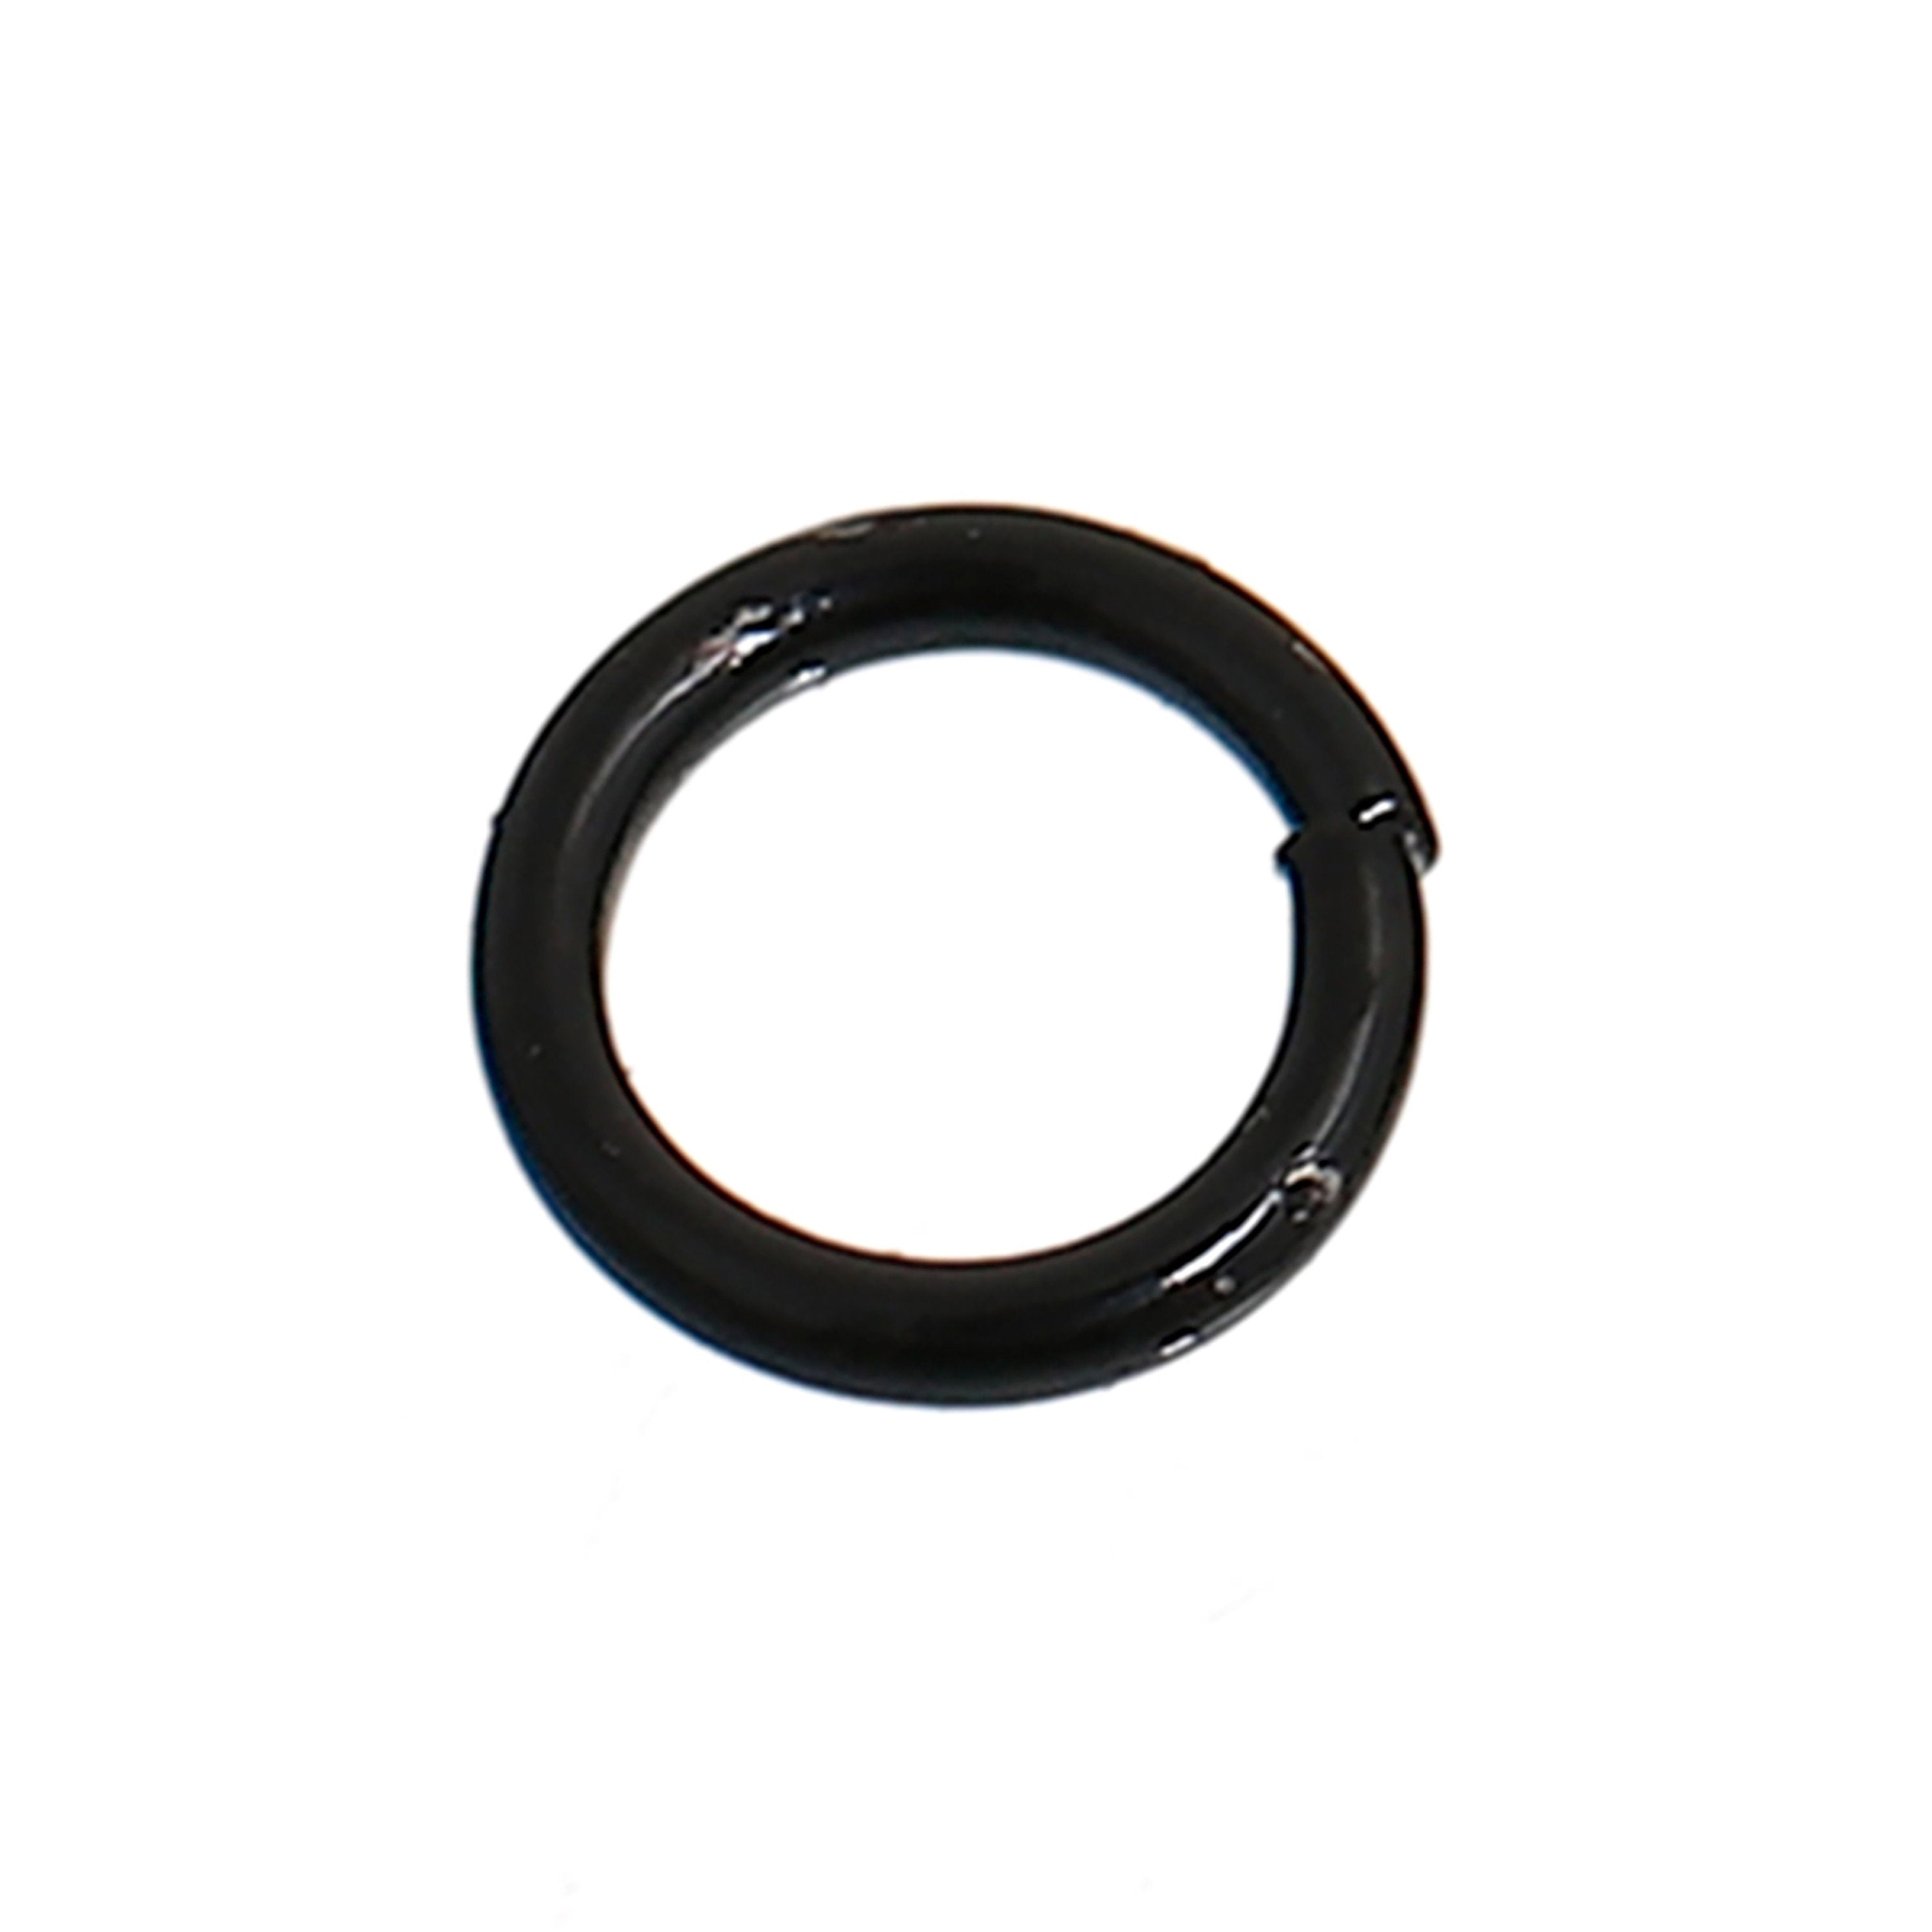 50pcs, 6mm, Iron Jump Ring Findings in Black